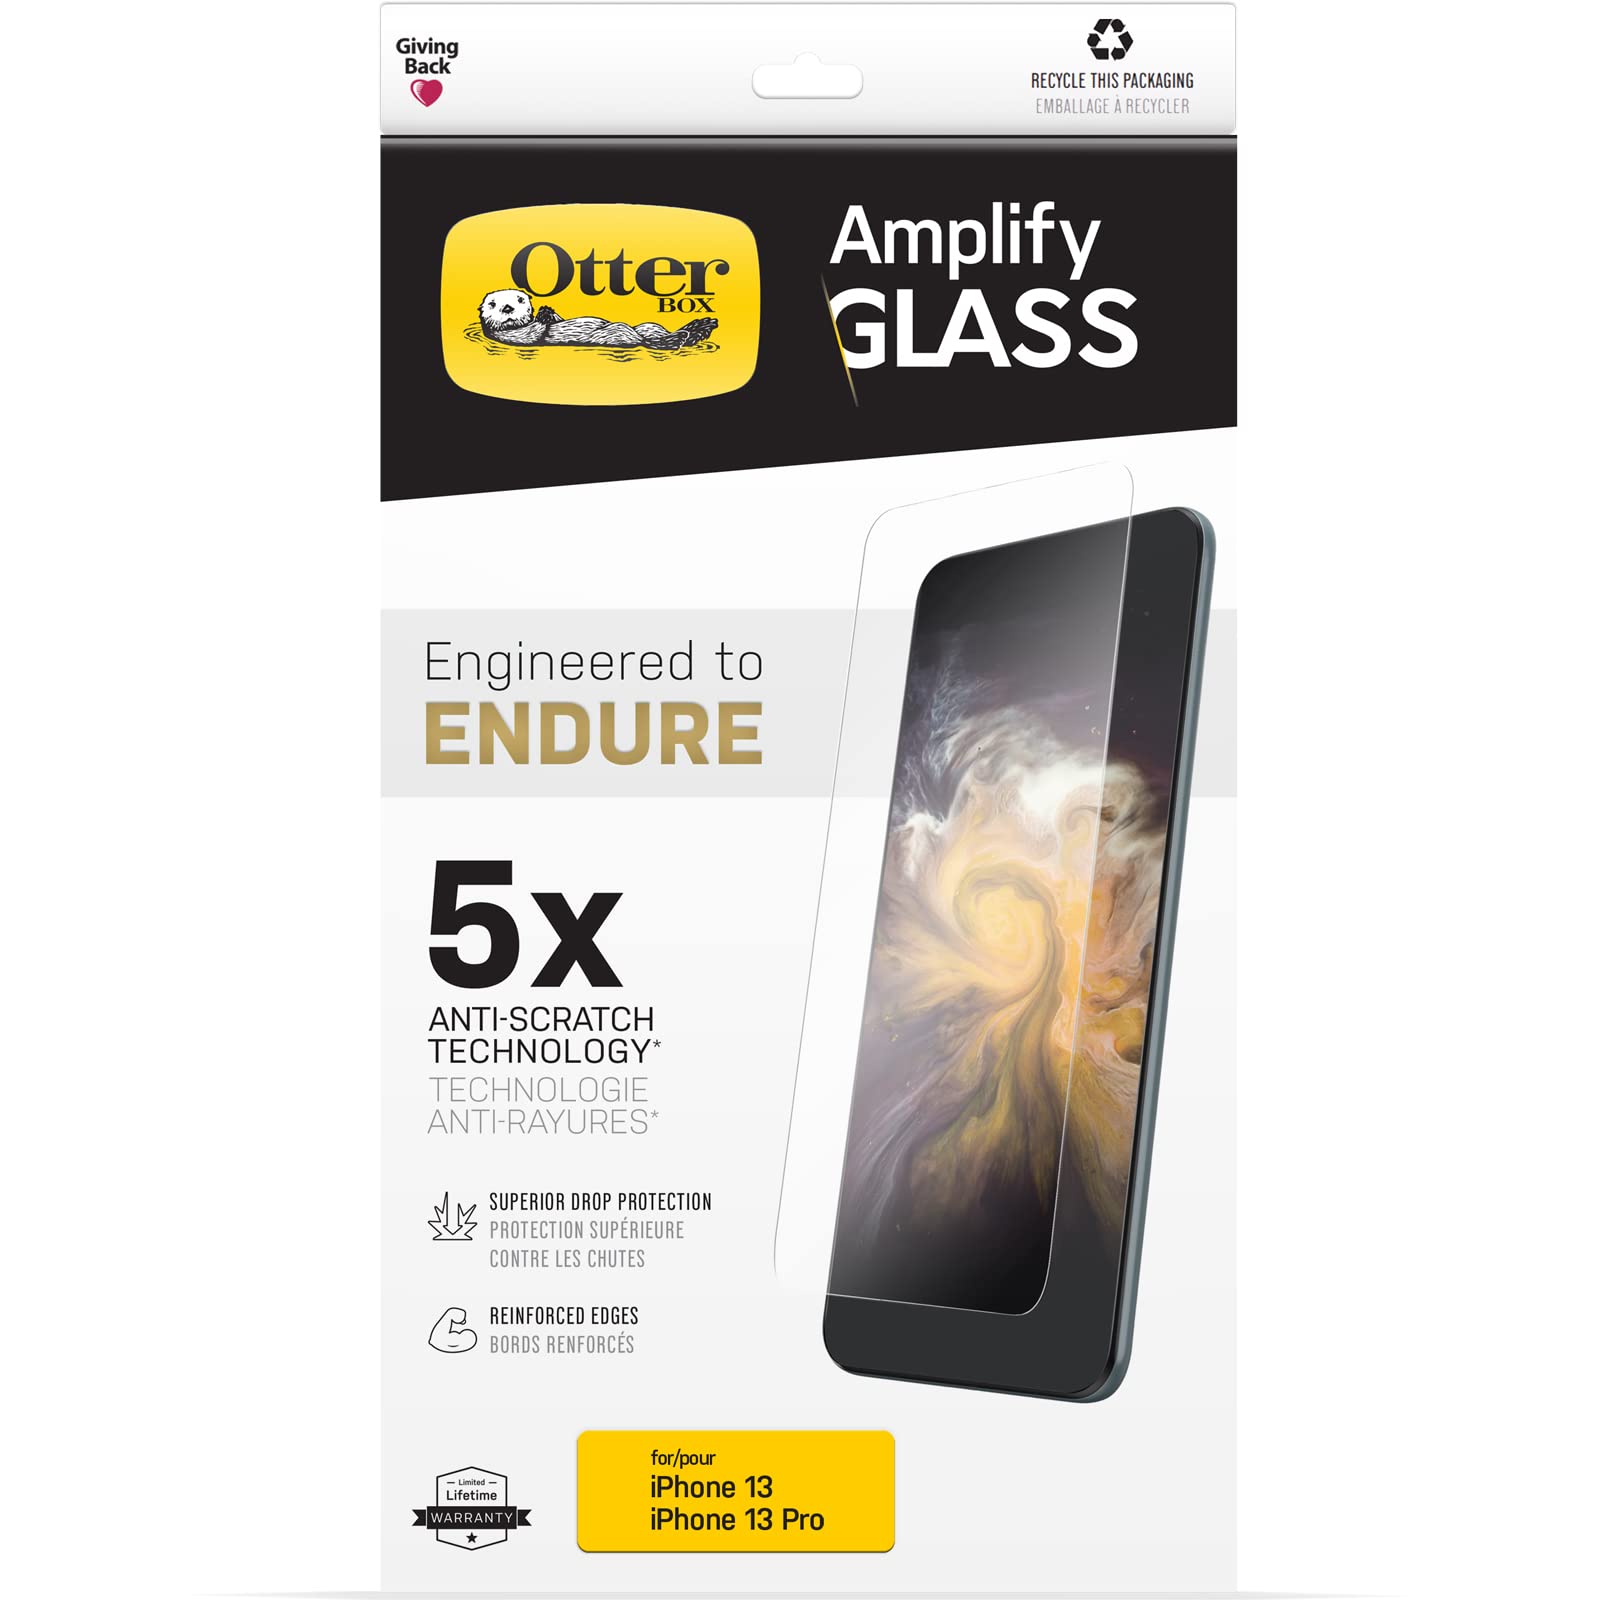 otterbox-and-corning-will-partner-to-make-an-advanced-screen-protector